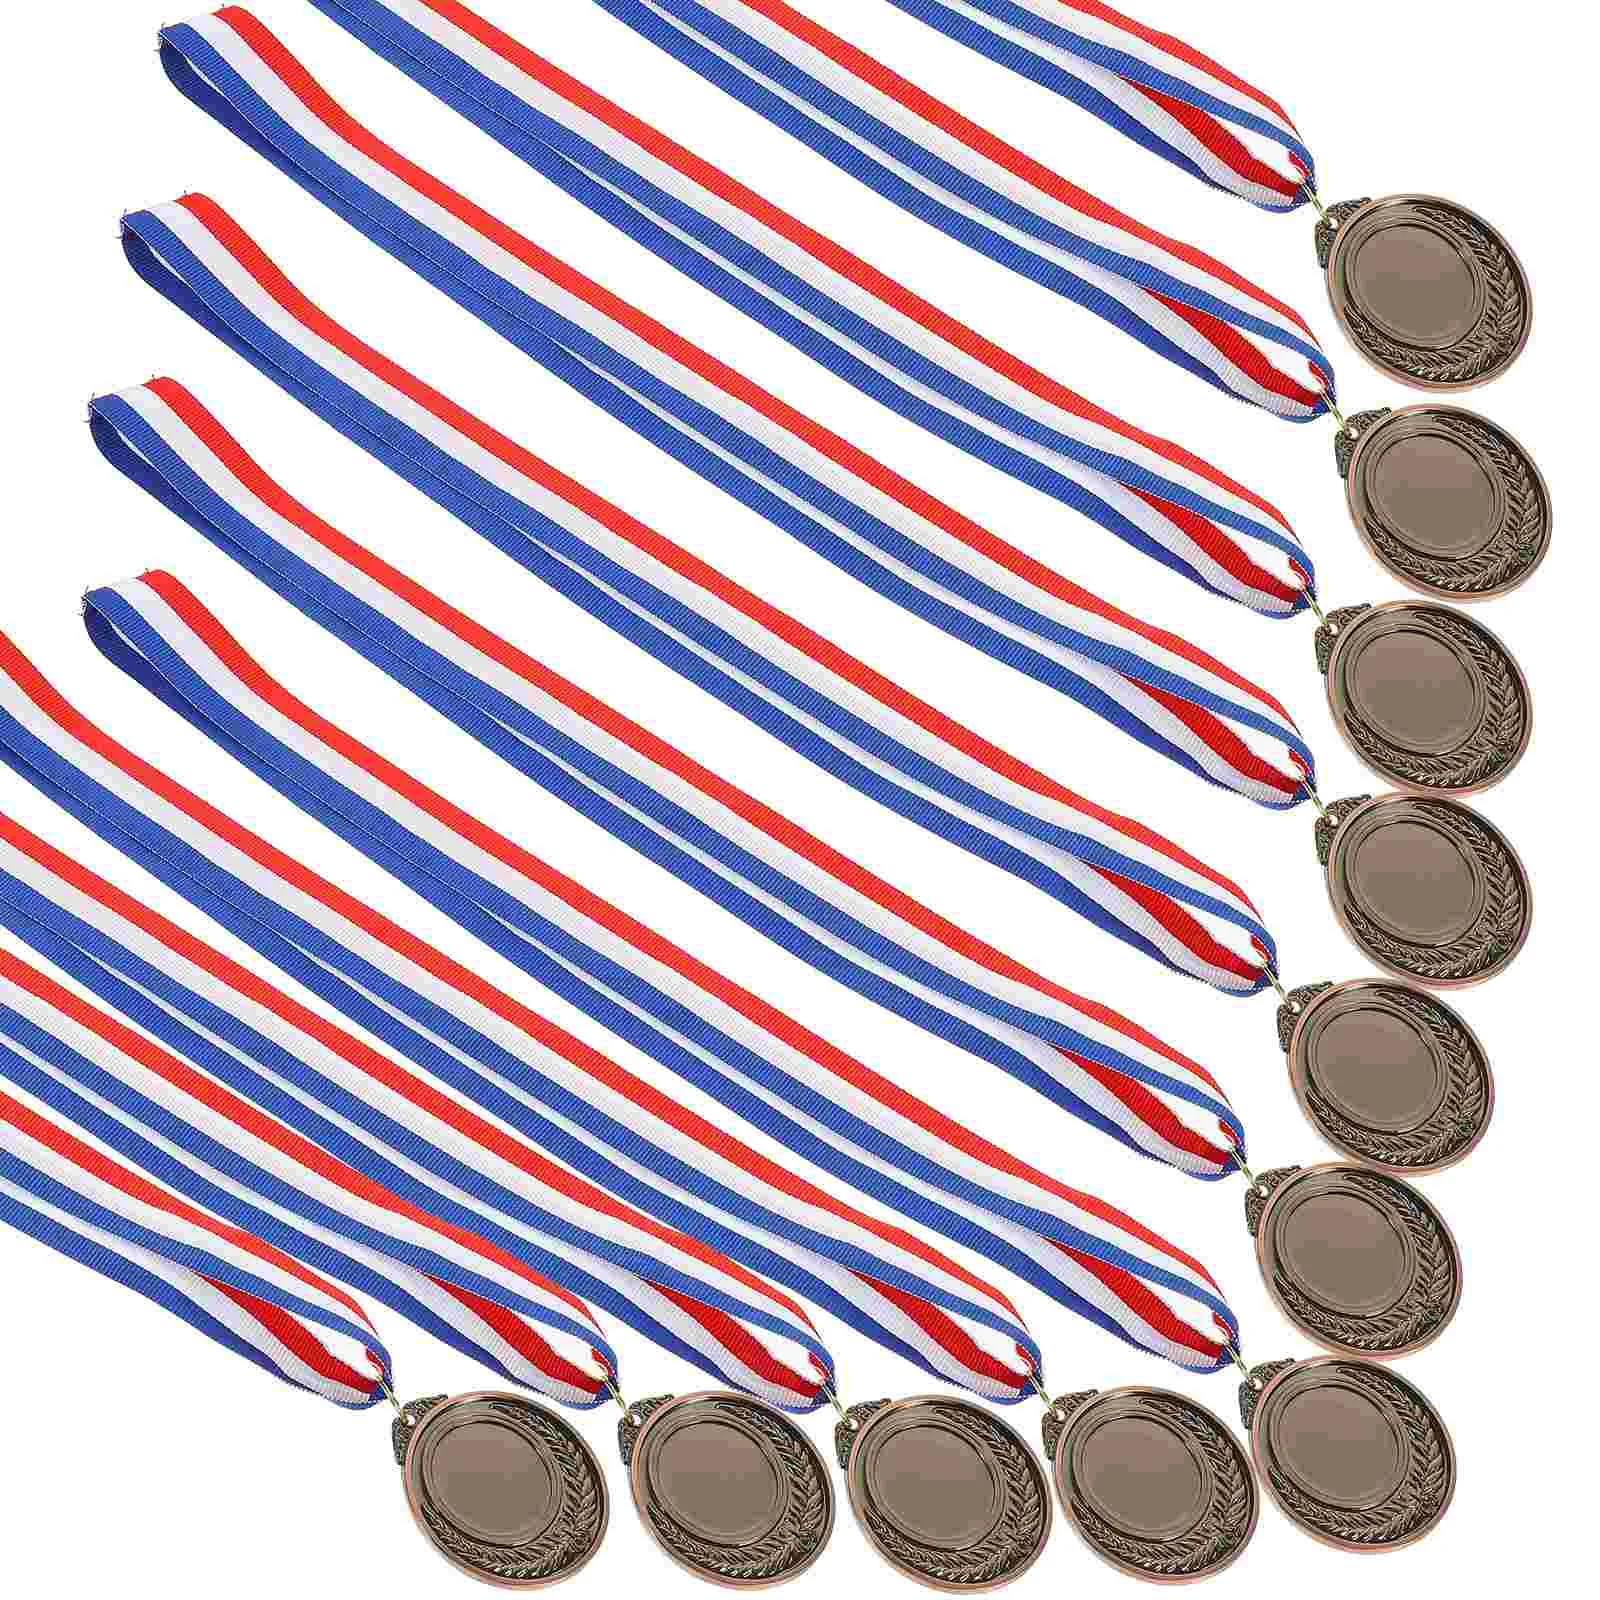 

24Pcs Student Medal Toy Sports Match Medals for Rewarding Award Medals